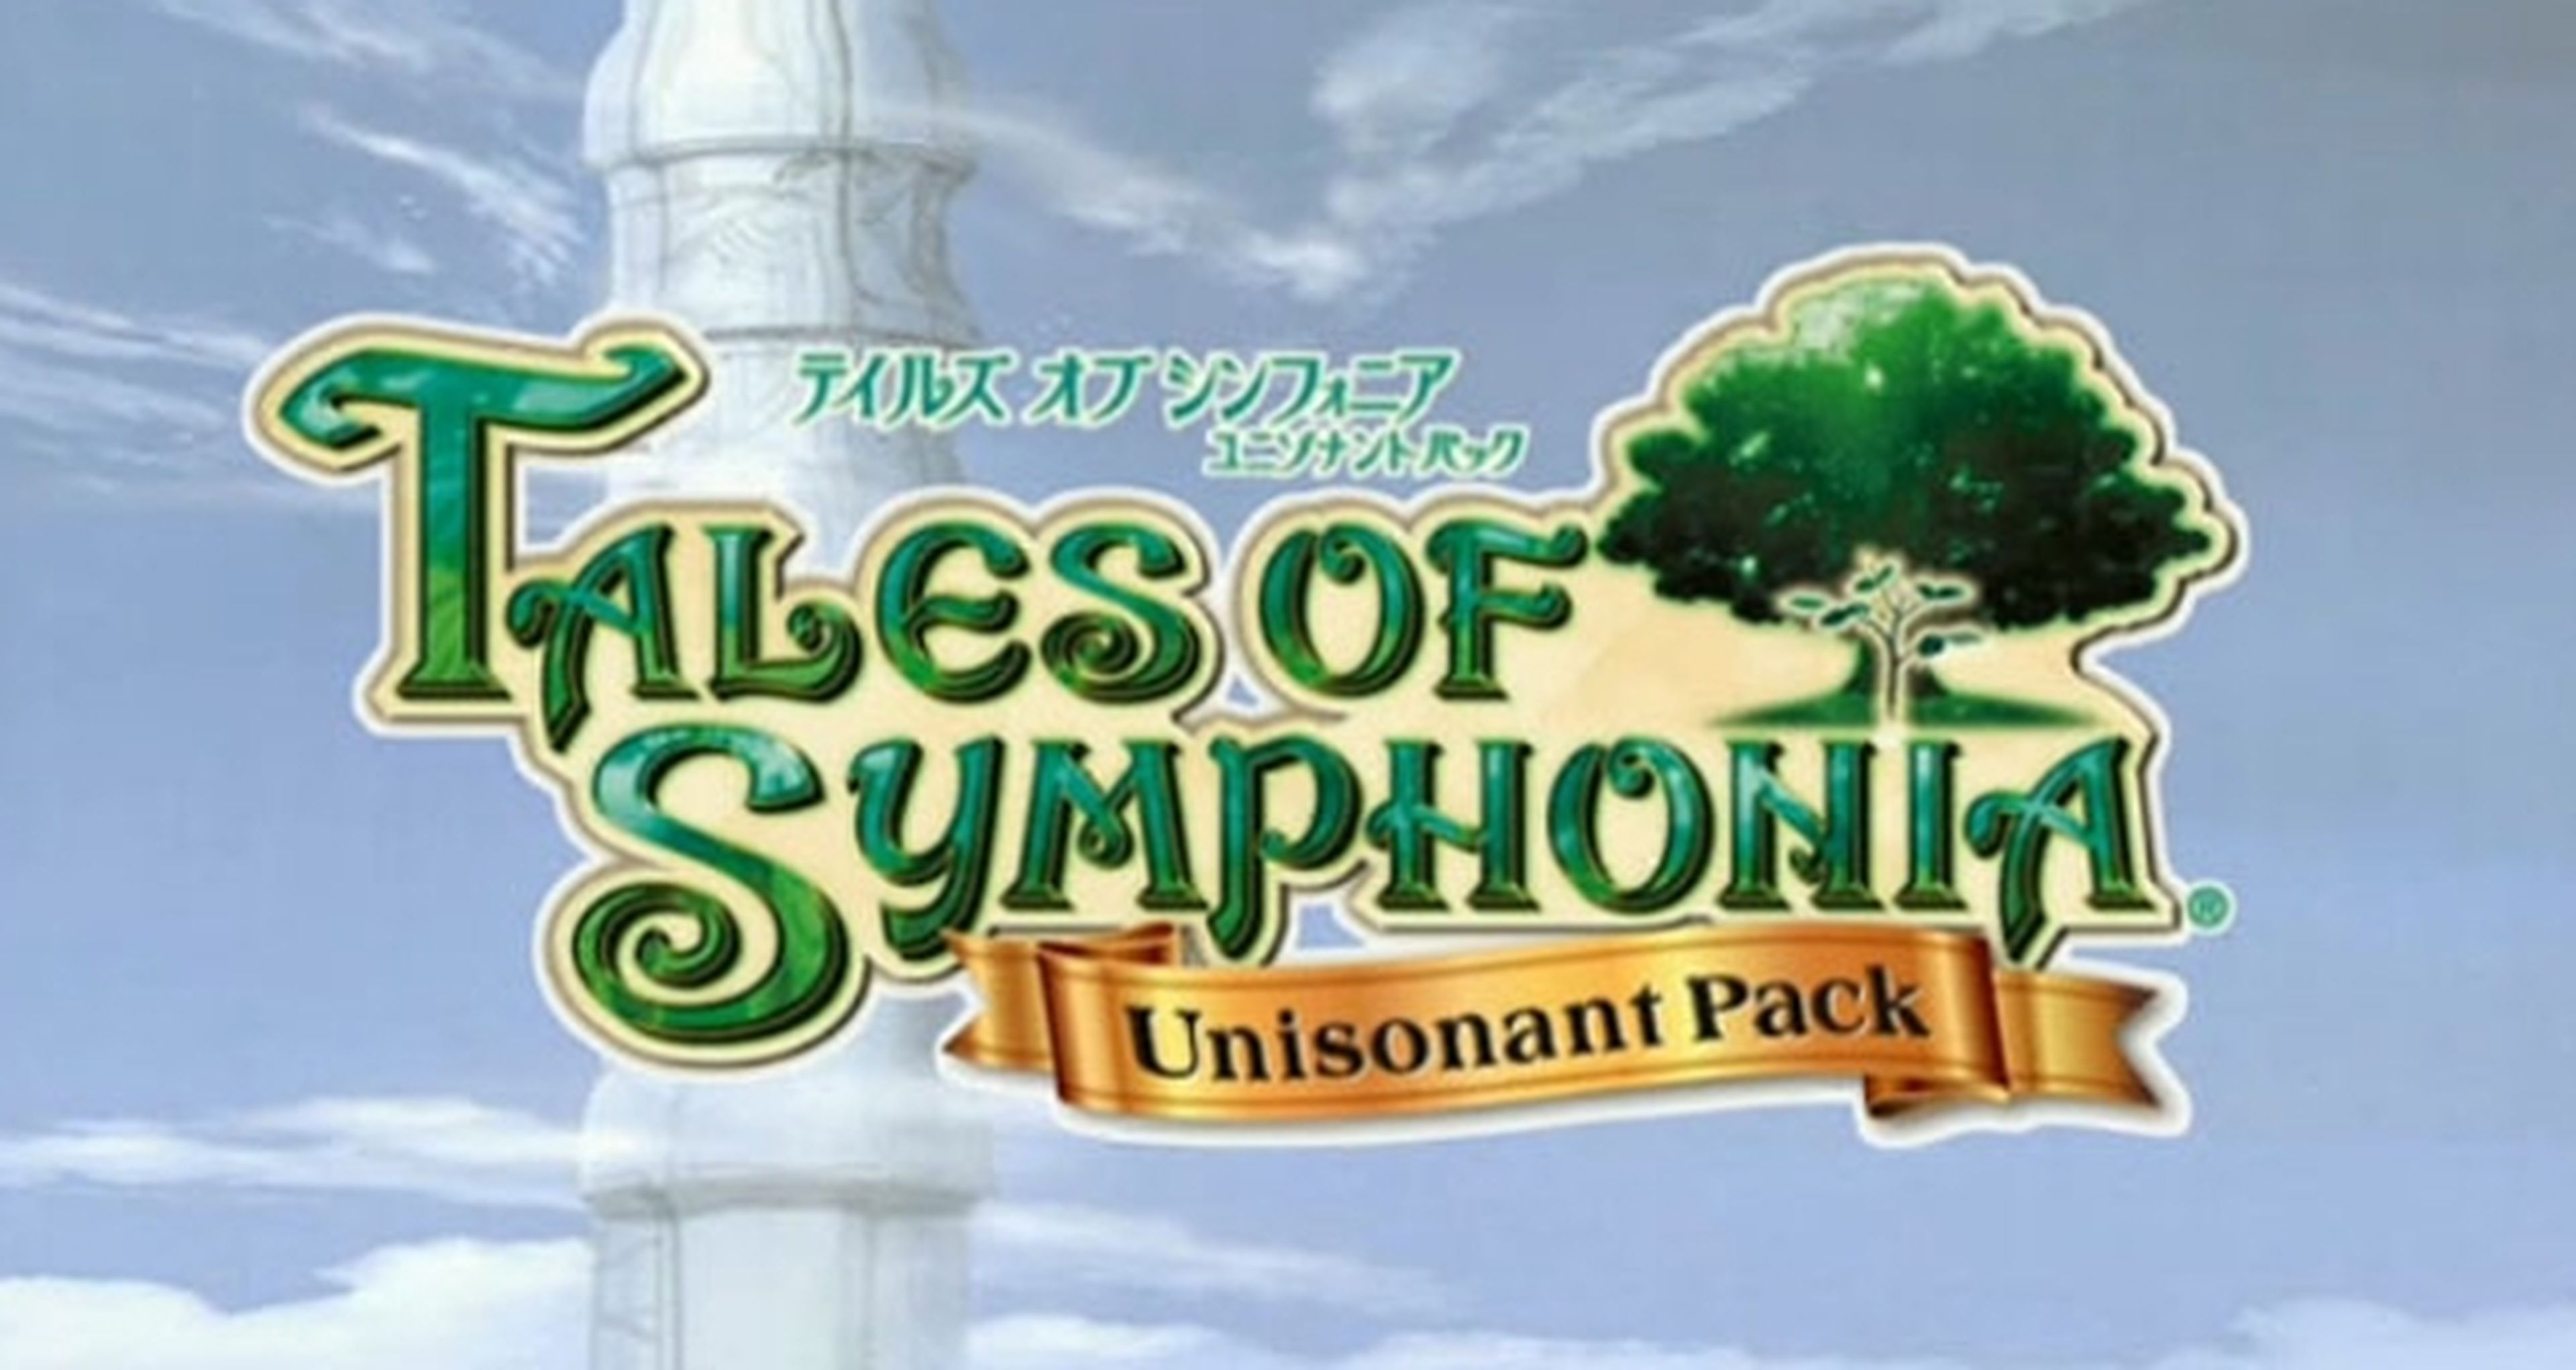 Tales of Symphonia Unisonant Pack, rumbo a PS3